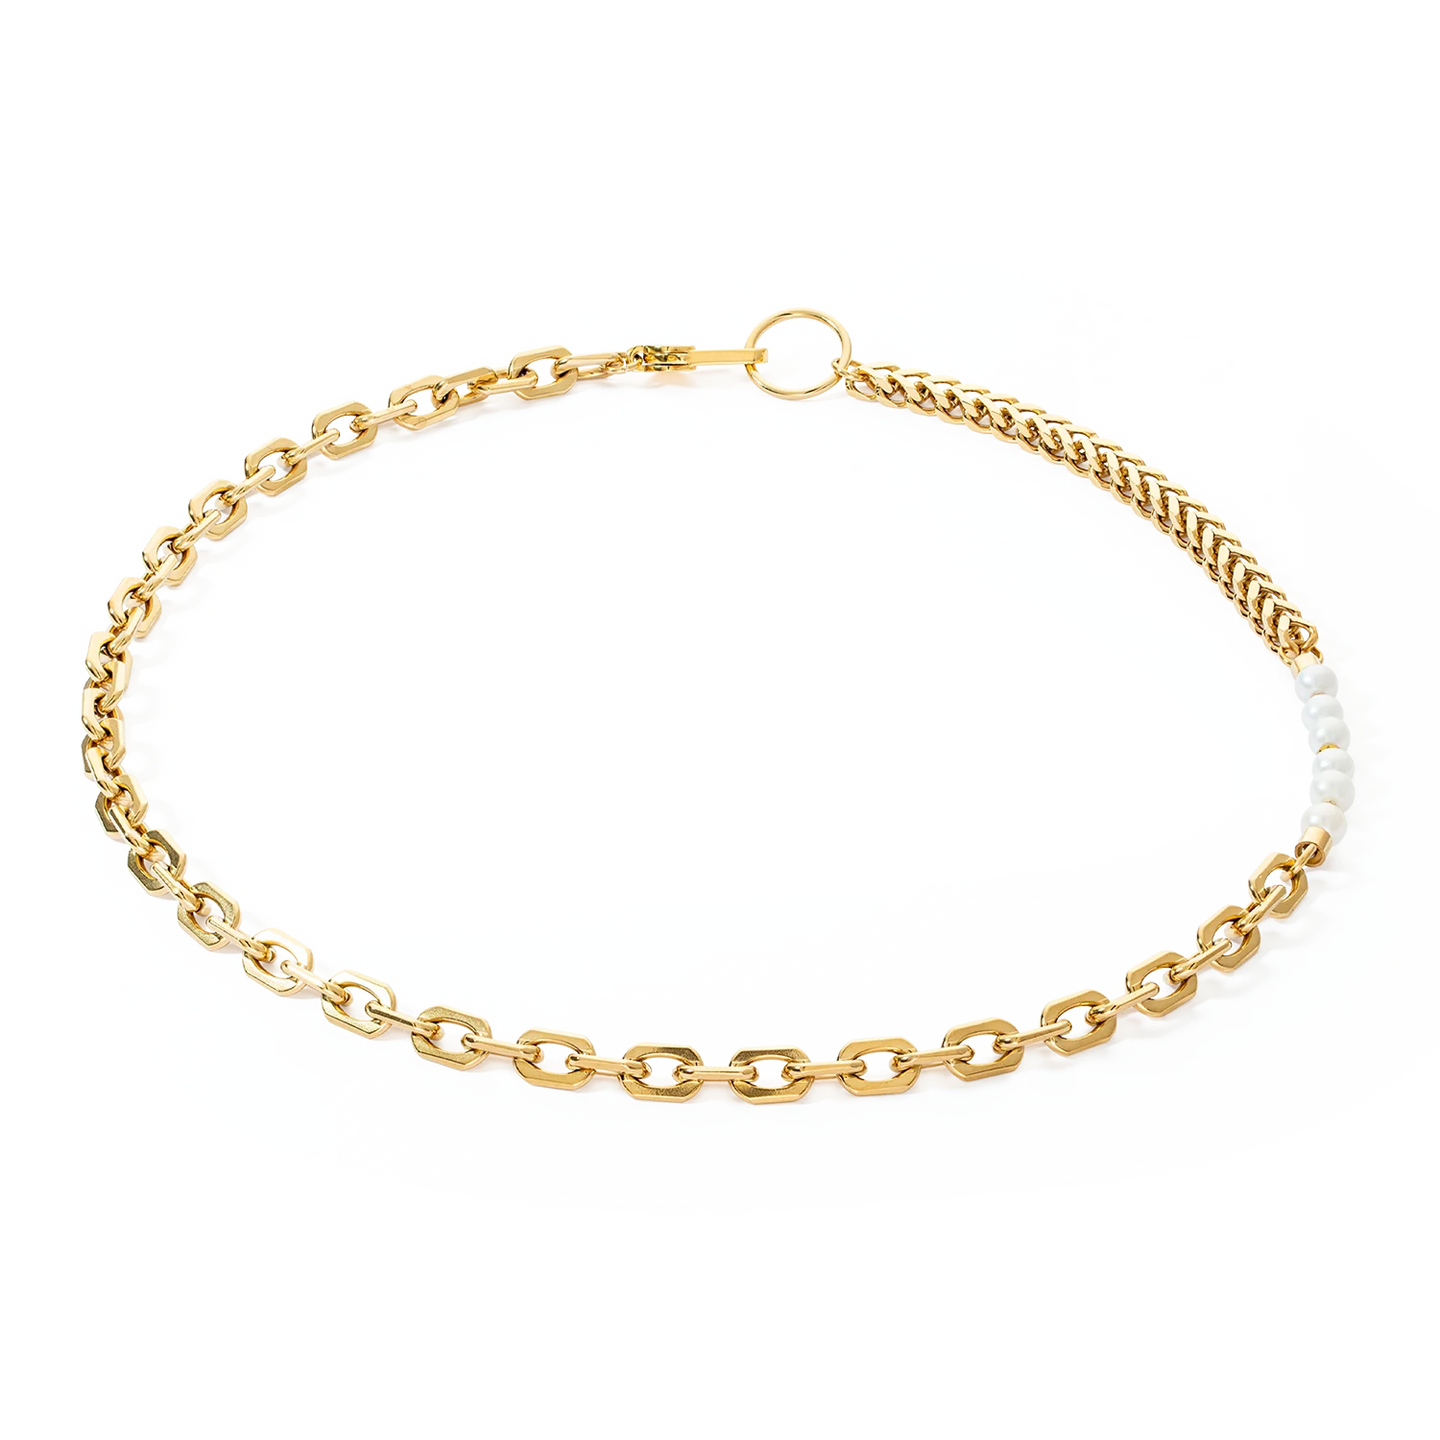 Shape Shifter Freshwater Pearl Gold Necklace